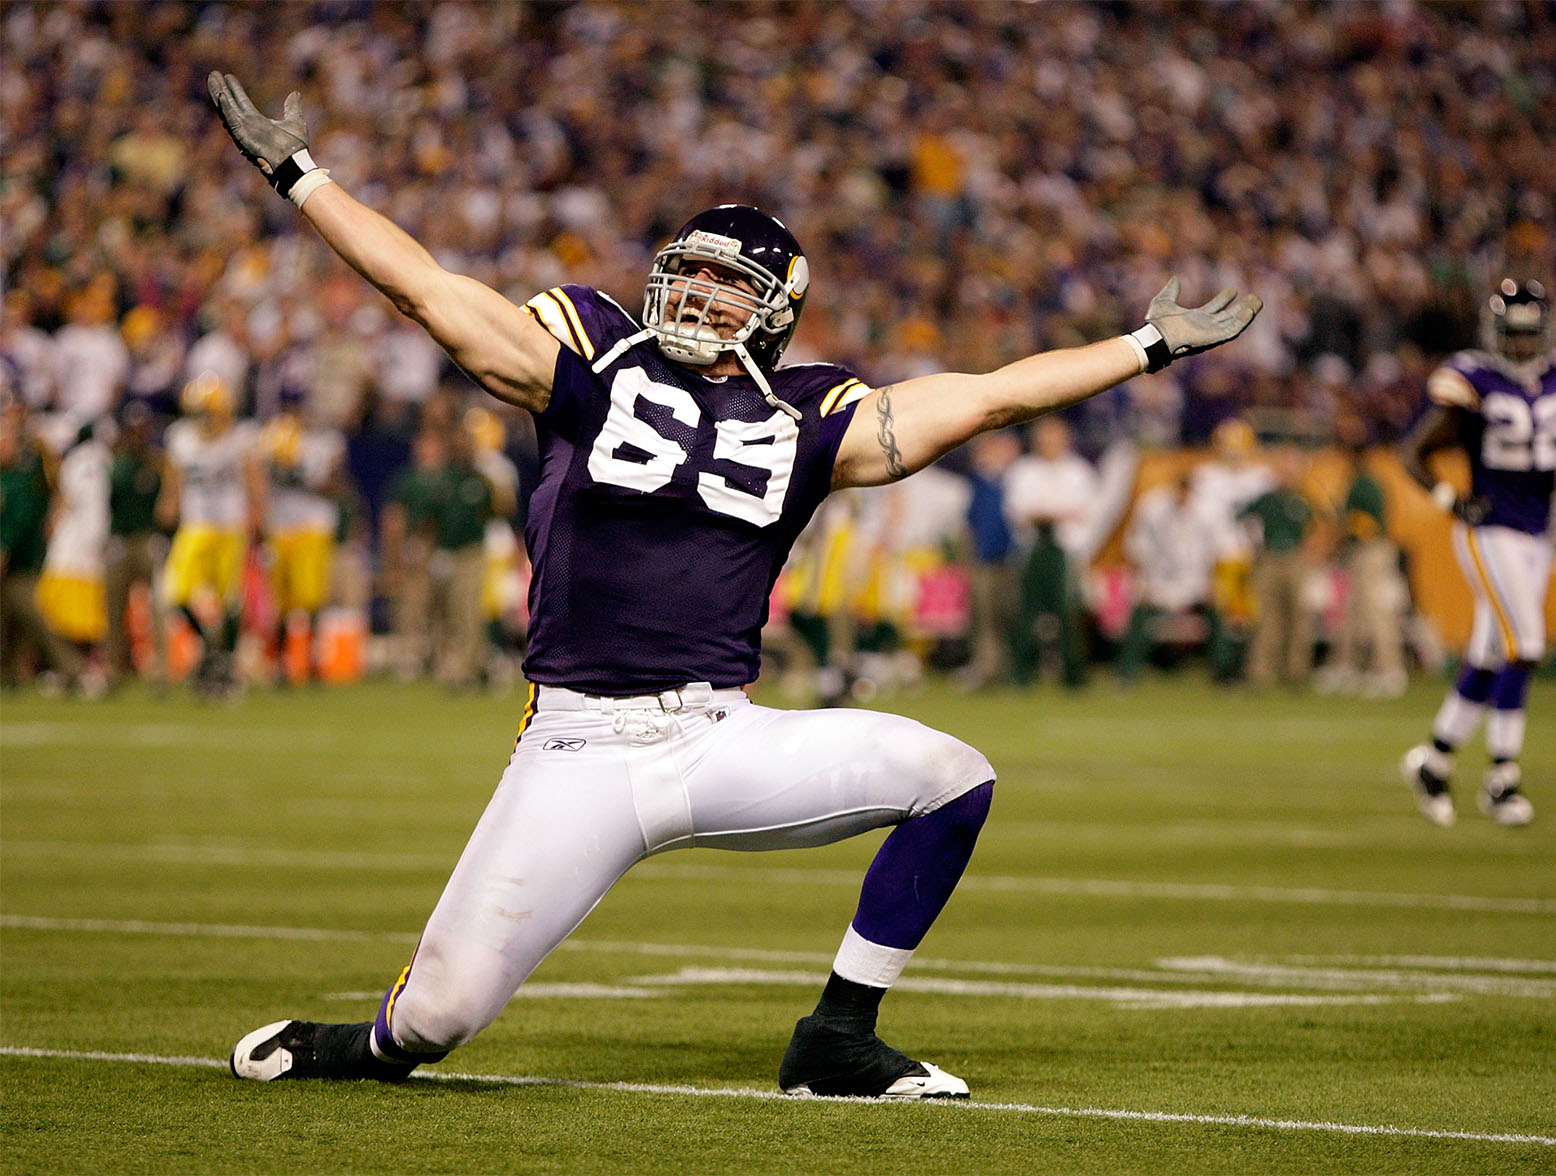 MINNEAPOLIS - OCTOBER 05: Defensive end Jared Allen #69 of the Minnesota Vikings celebrates after a sack during the Monday Night Football game against the Green Bay Packers on October 5, 2009 at Hubert H. Humphrey Metrodome in Minneapolis, Minnesota. (Photo by Jamie Squire/Getty Images)